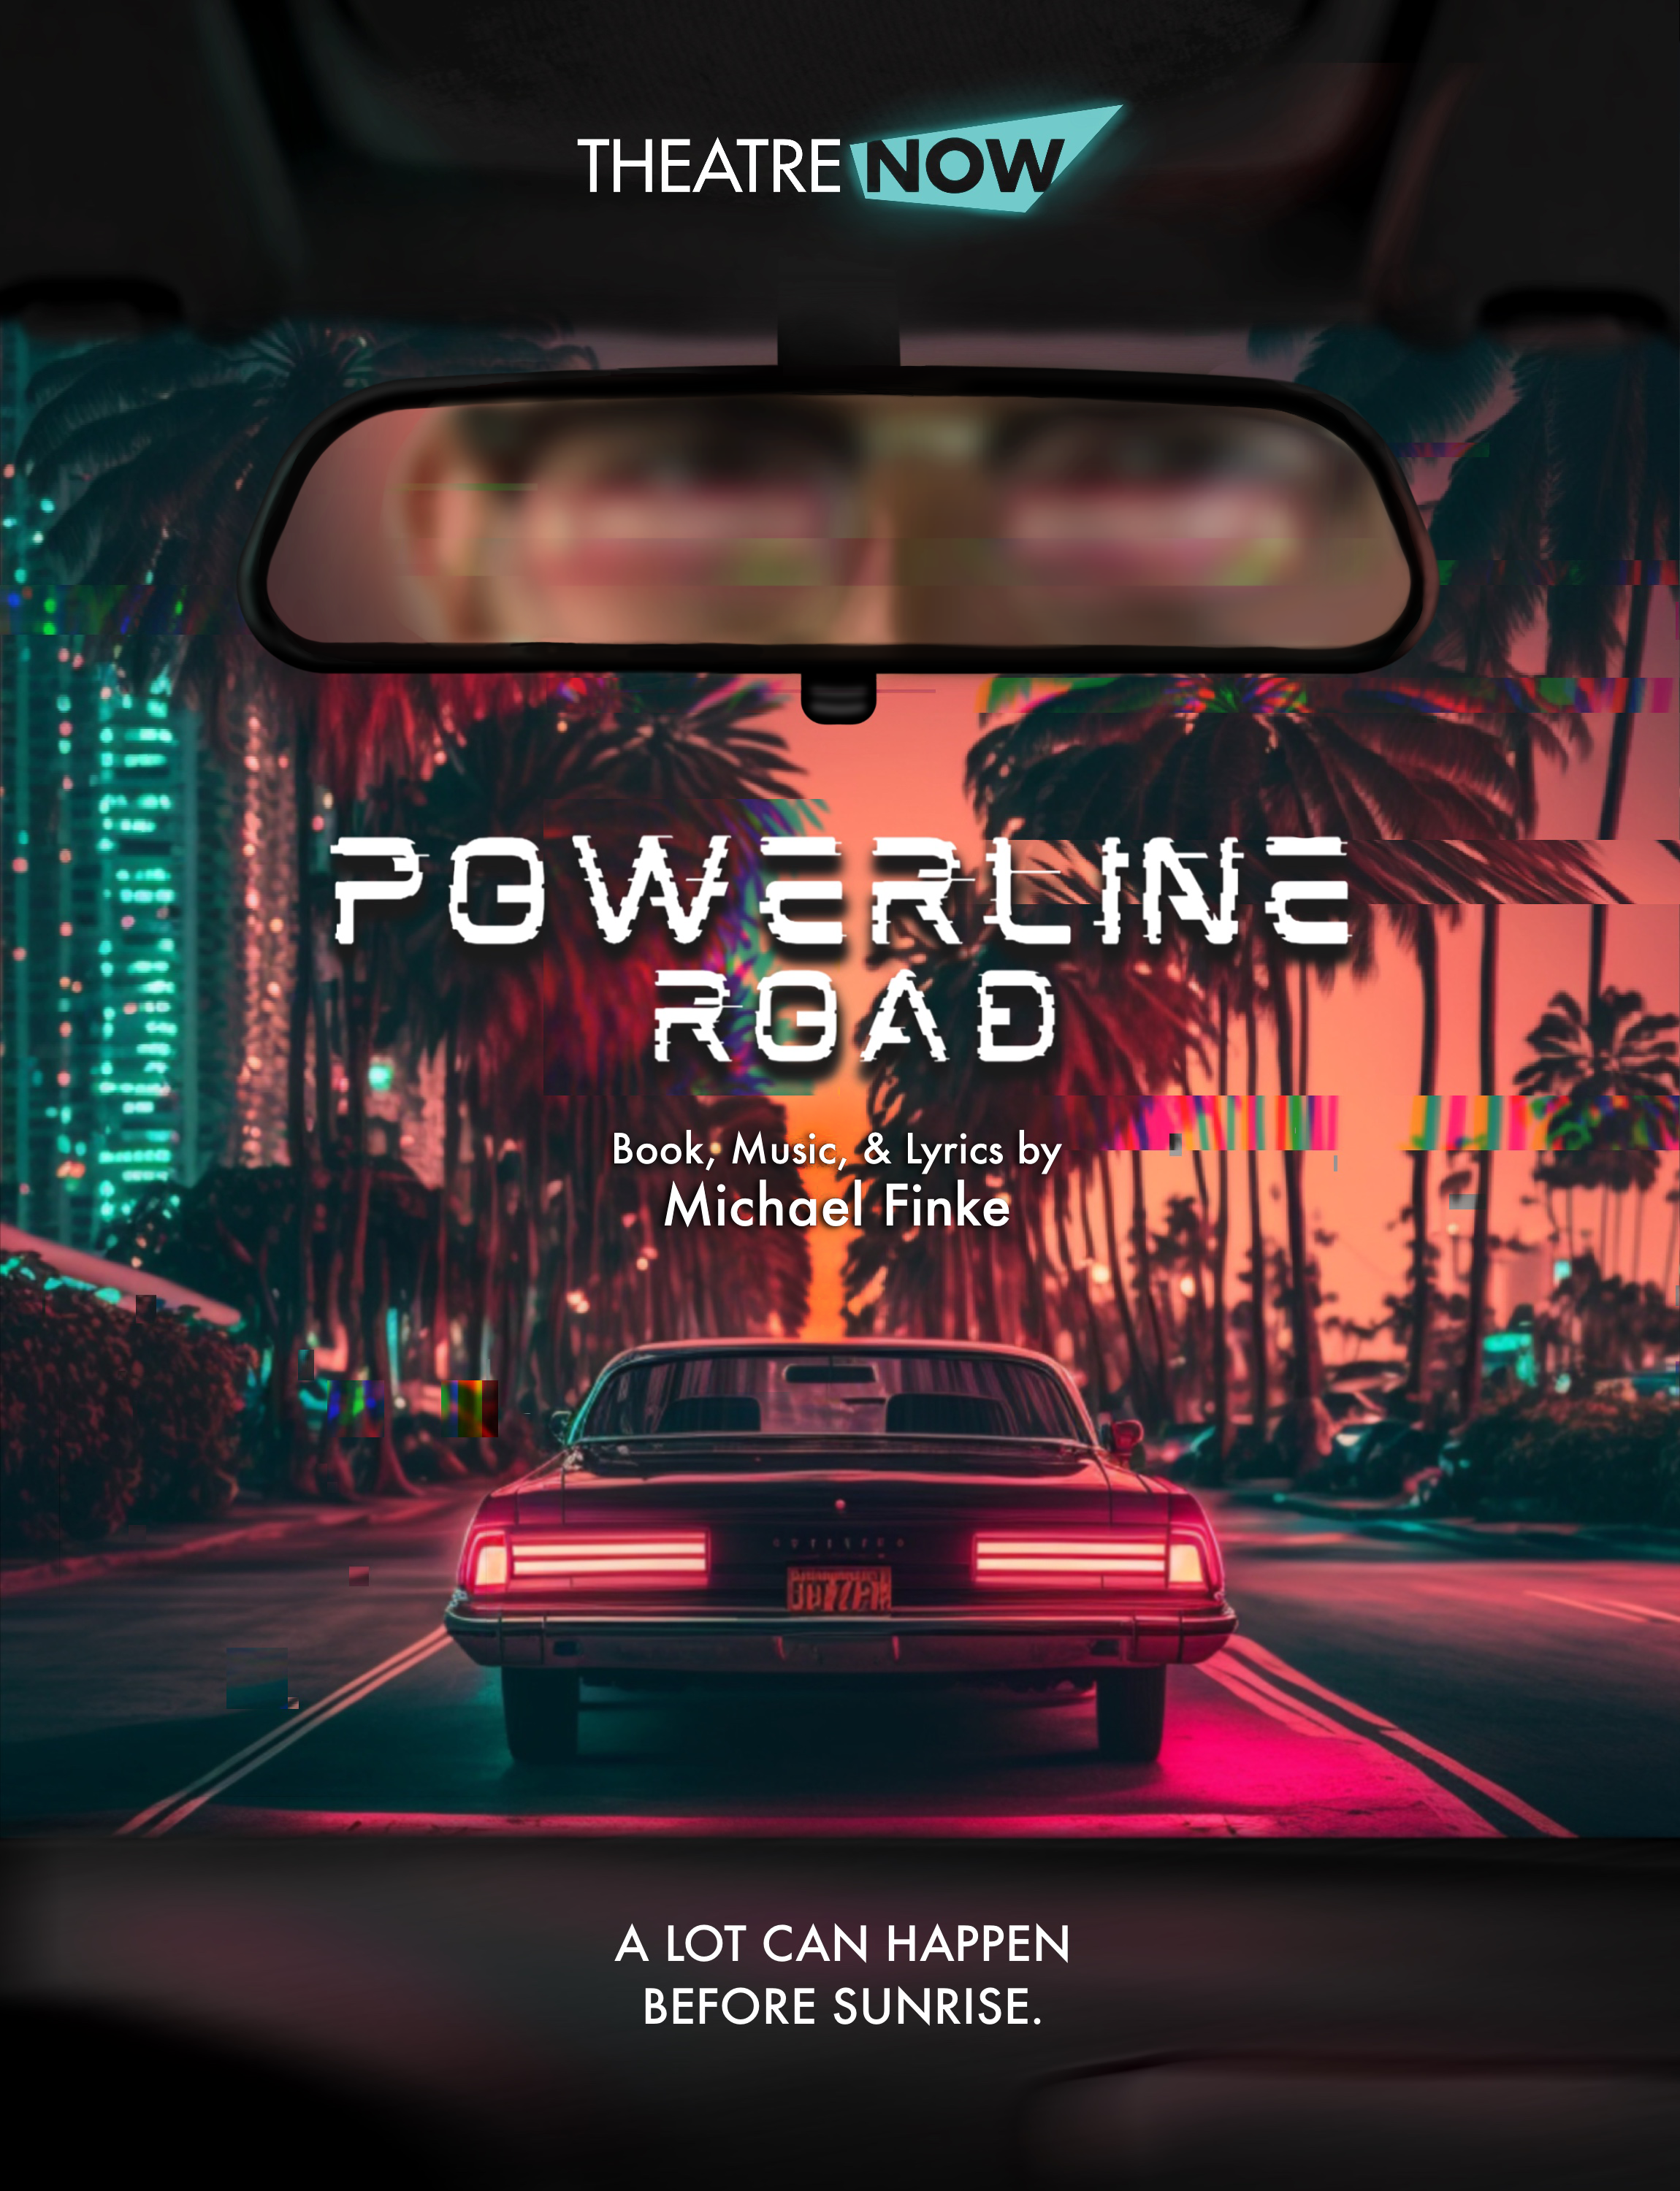 Image for Powerline Road. Pixelated eyes look back at the viewer from a rearview mirror. Lining the sides of the image are palm trees. The whole image has a neon aesthetic similar to 80s films. Directly ahead of us in the foreground of the image is the back bumper of a car, its tail lights on. The tagline for the show, at the bottom of the image is "A lot can happen before sunrise."